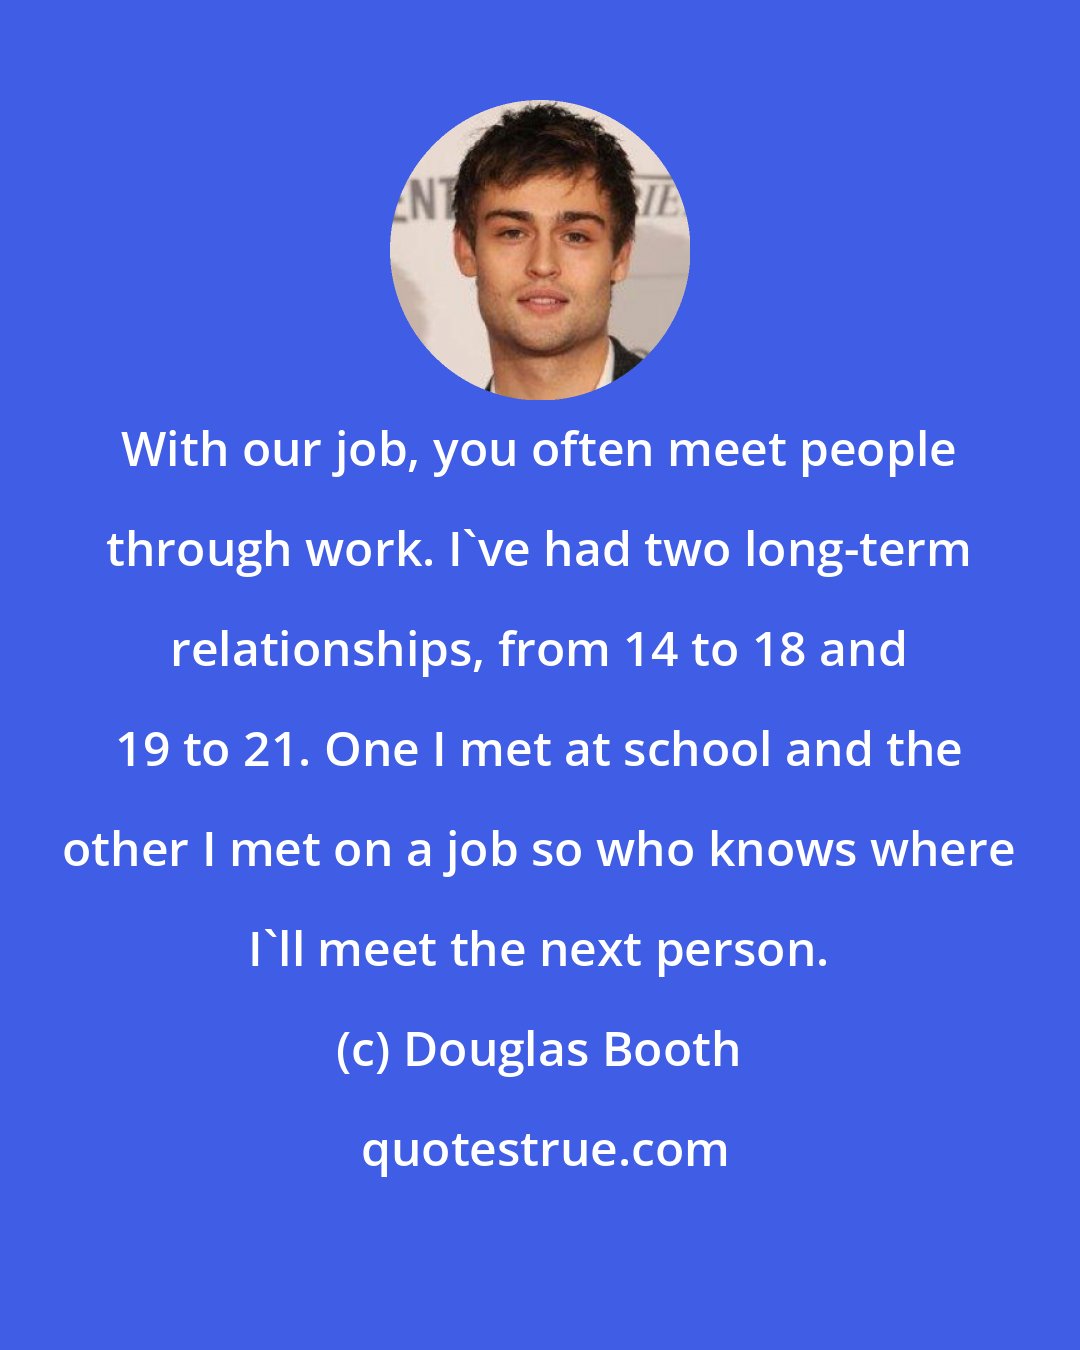 Douglas Booth: With our job, you often meet people through work. I've had two long-term relationships, from 14 to 18 and 19 to 21. One I met at school and the other I met on a job so who knows where I'll meet the next person.